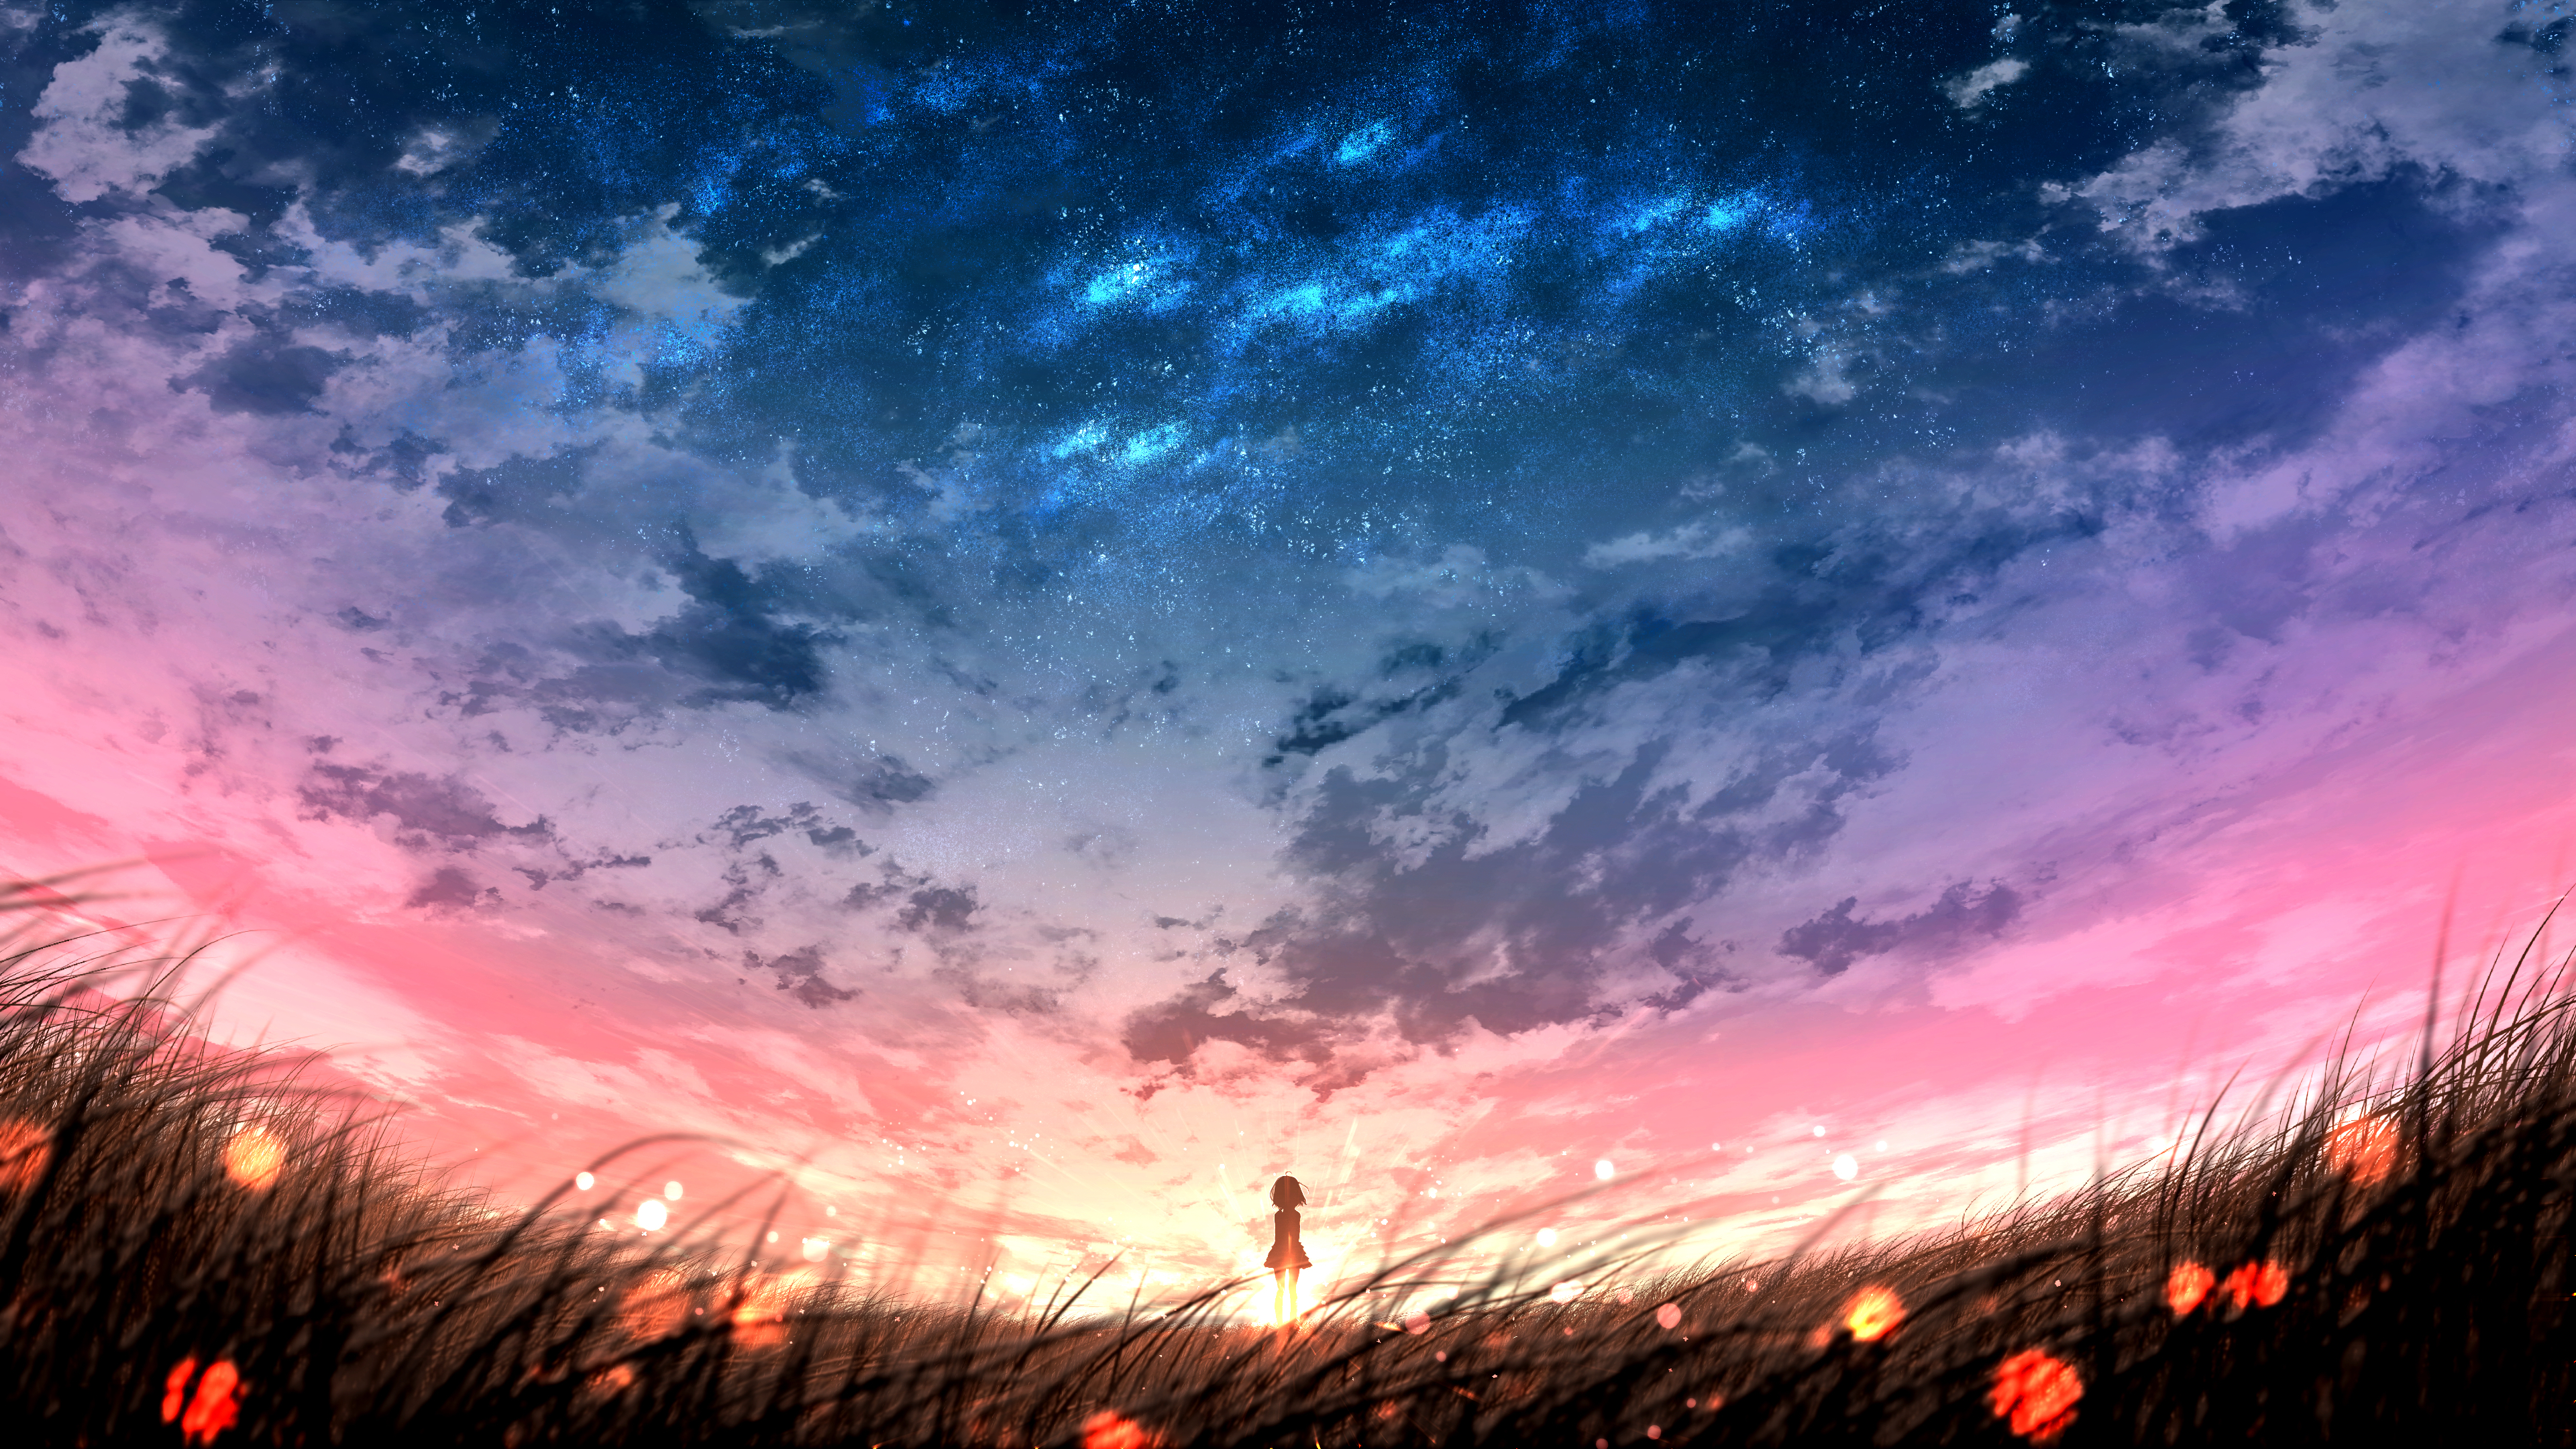 A painting of the sky and grass - Anime sunset